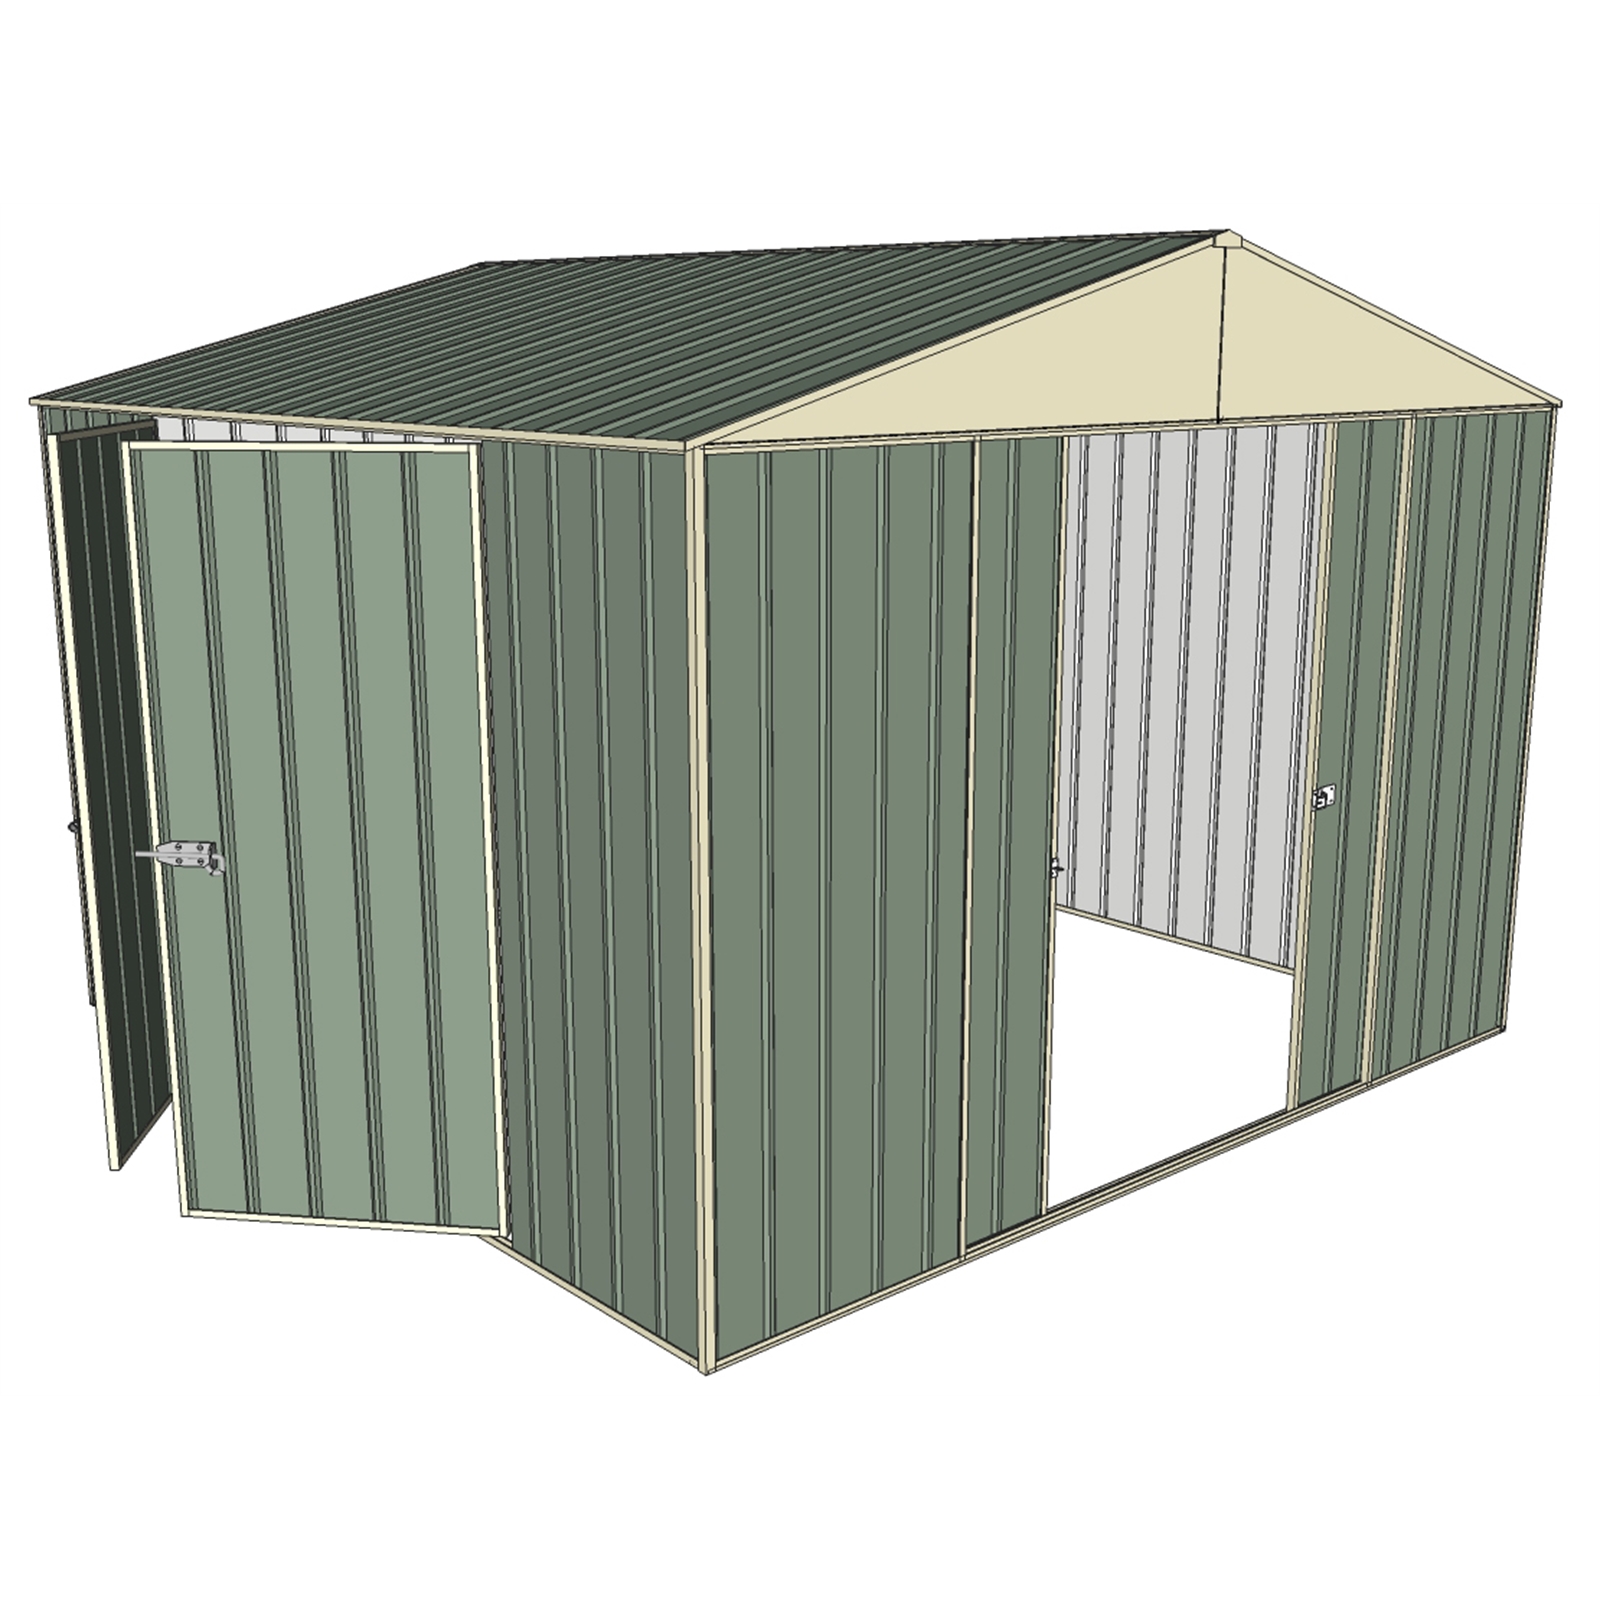 Build-a-Shed 3.0 x 2.3 x 3.0m Green Double Sliding and Double Hinge Door Shed